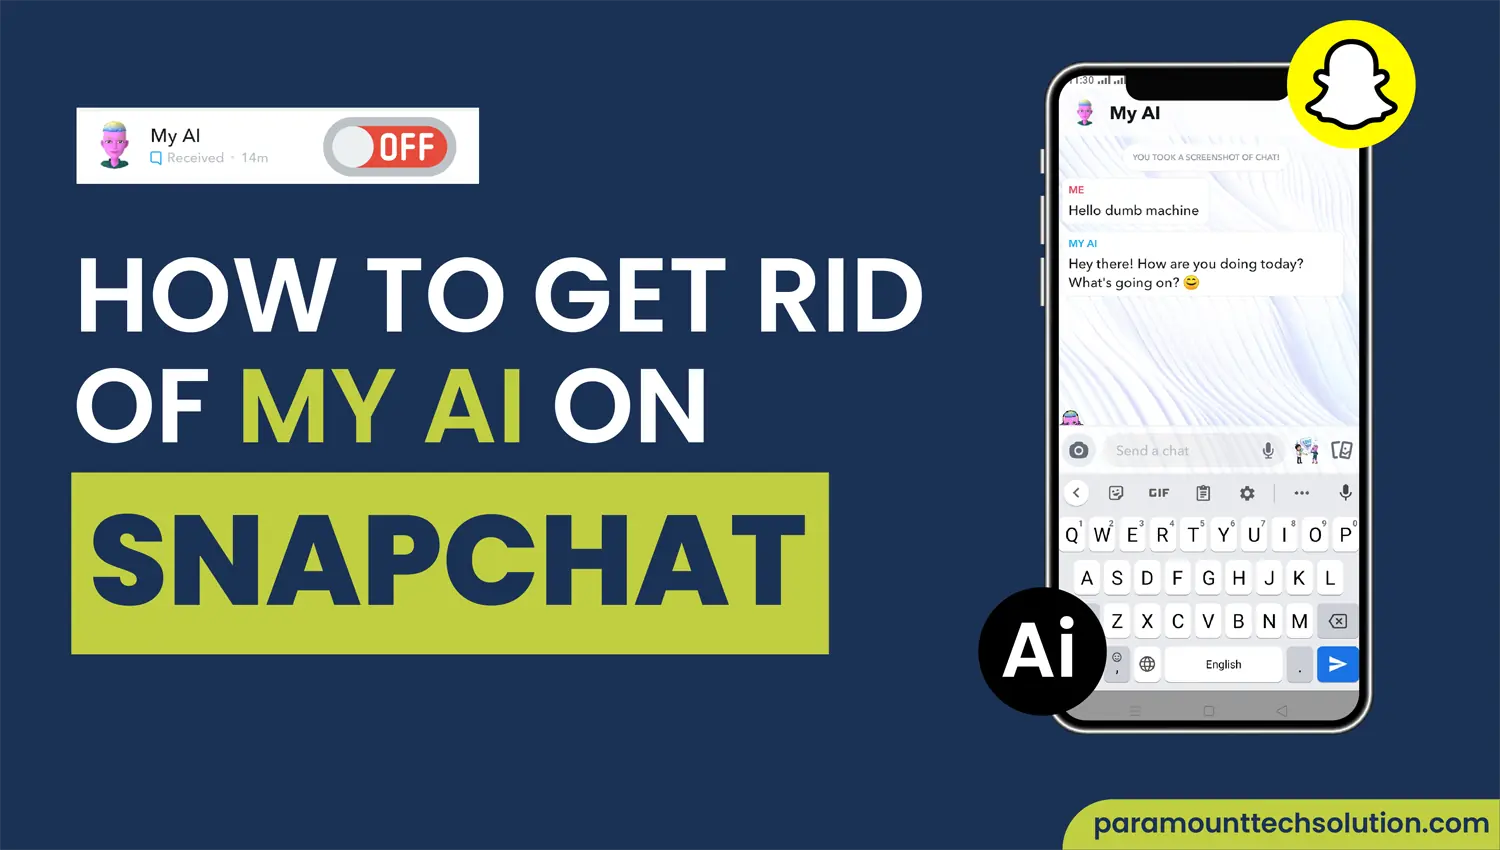 How to get rid of my AI on Snapchat complete guide that how you can remove or delete My Ai.